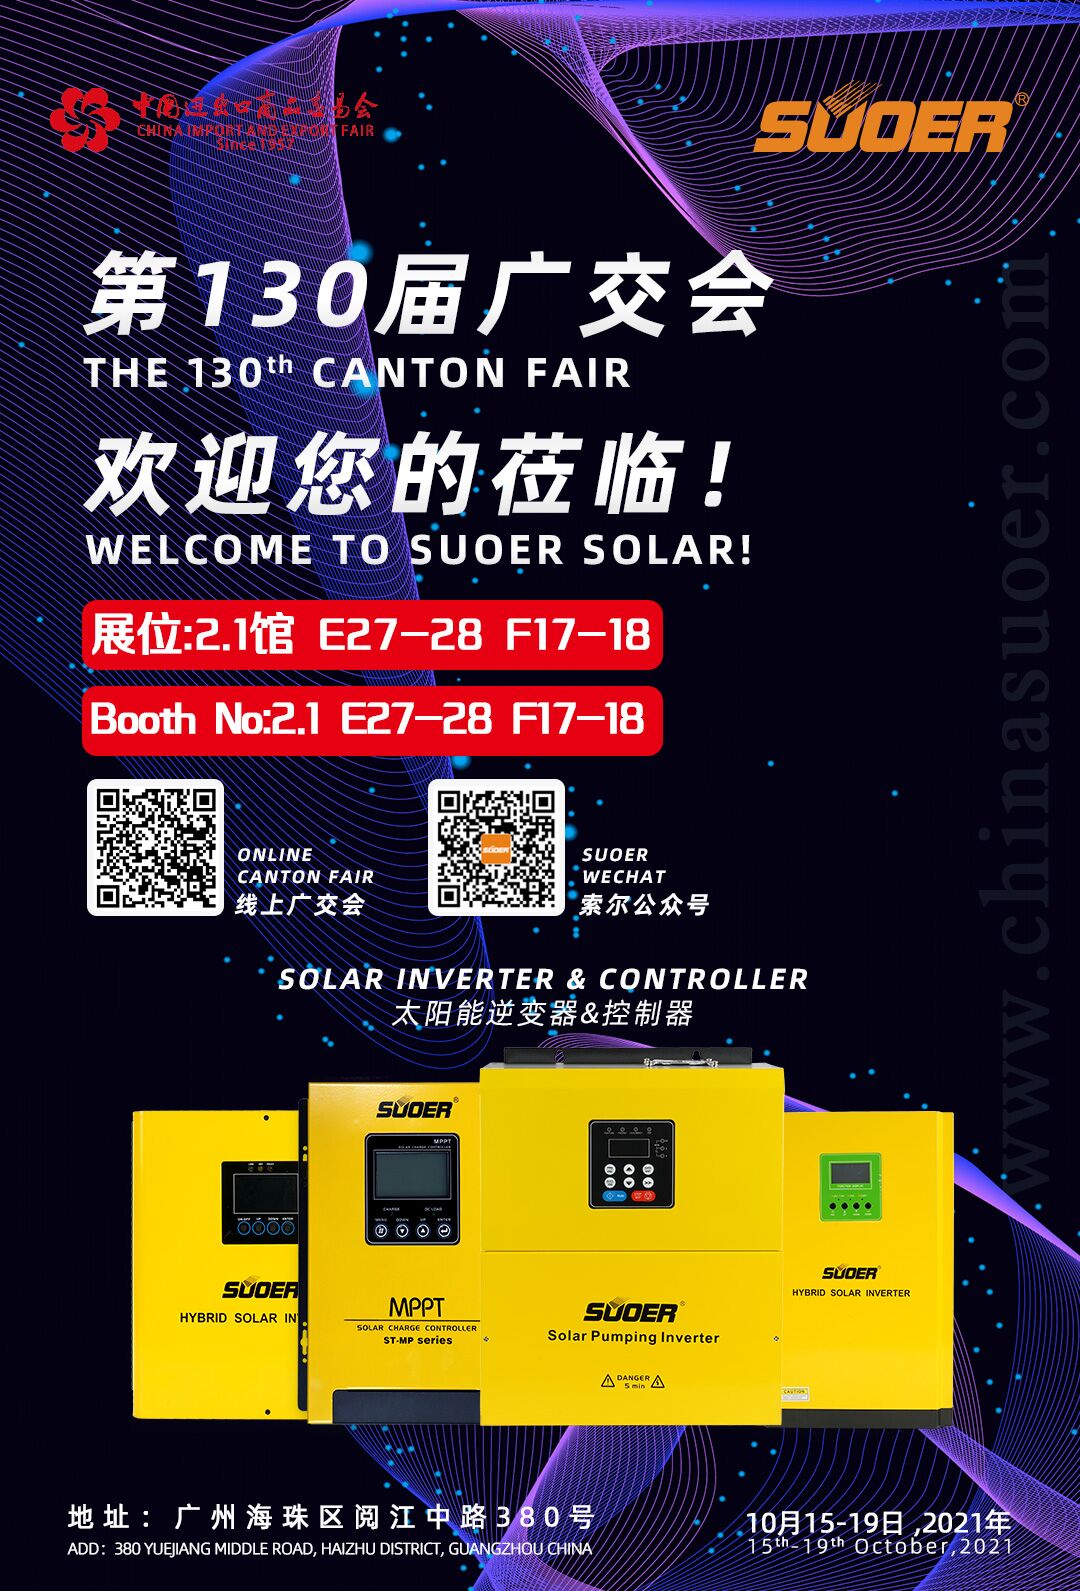 The 130th Canton Fair will be held from October 15th to 19th, 2021